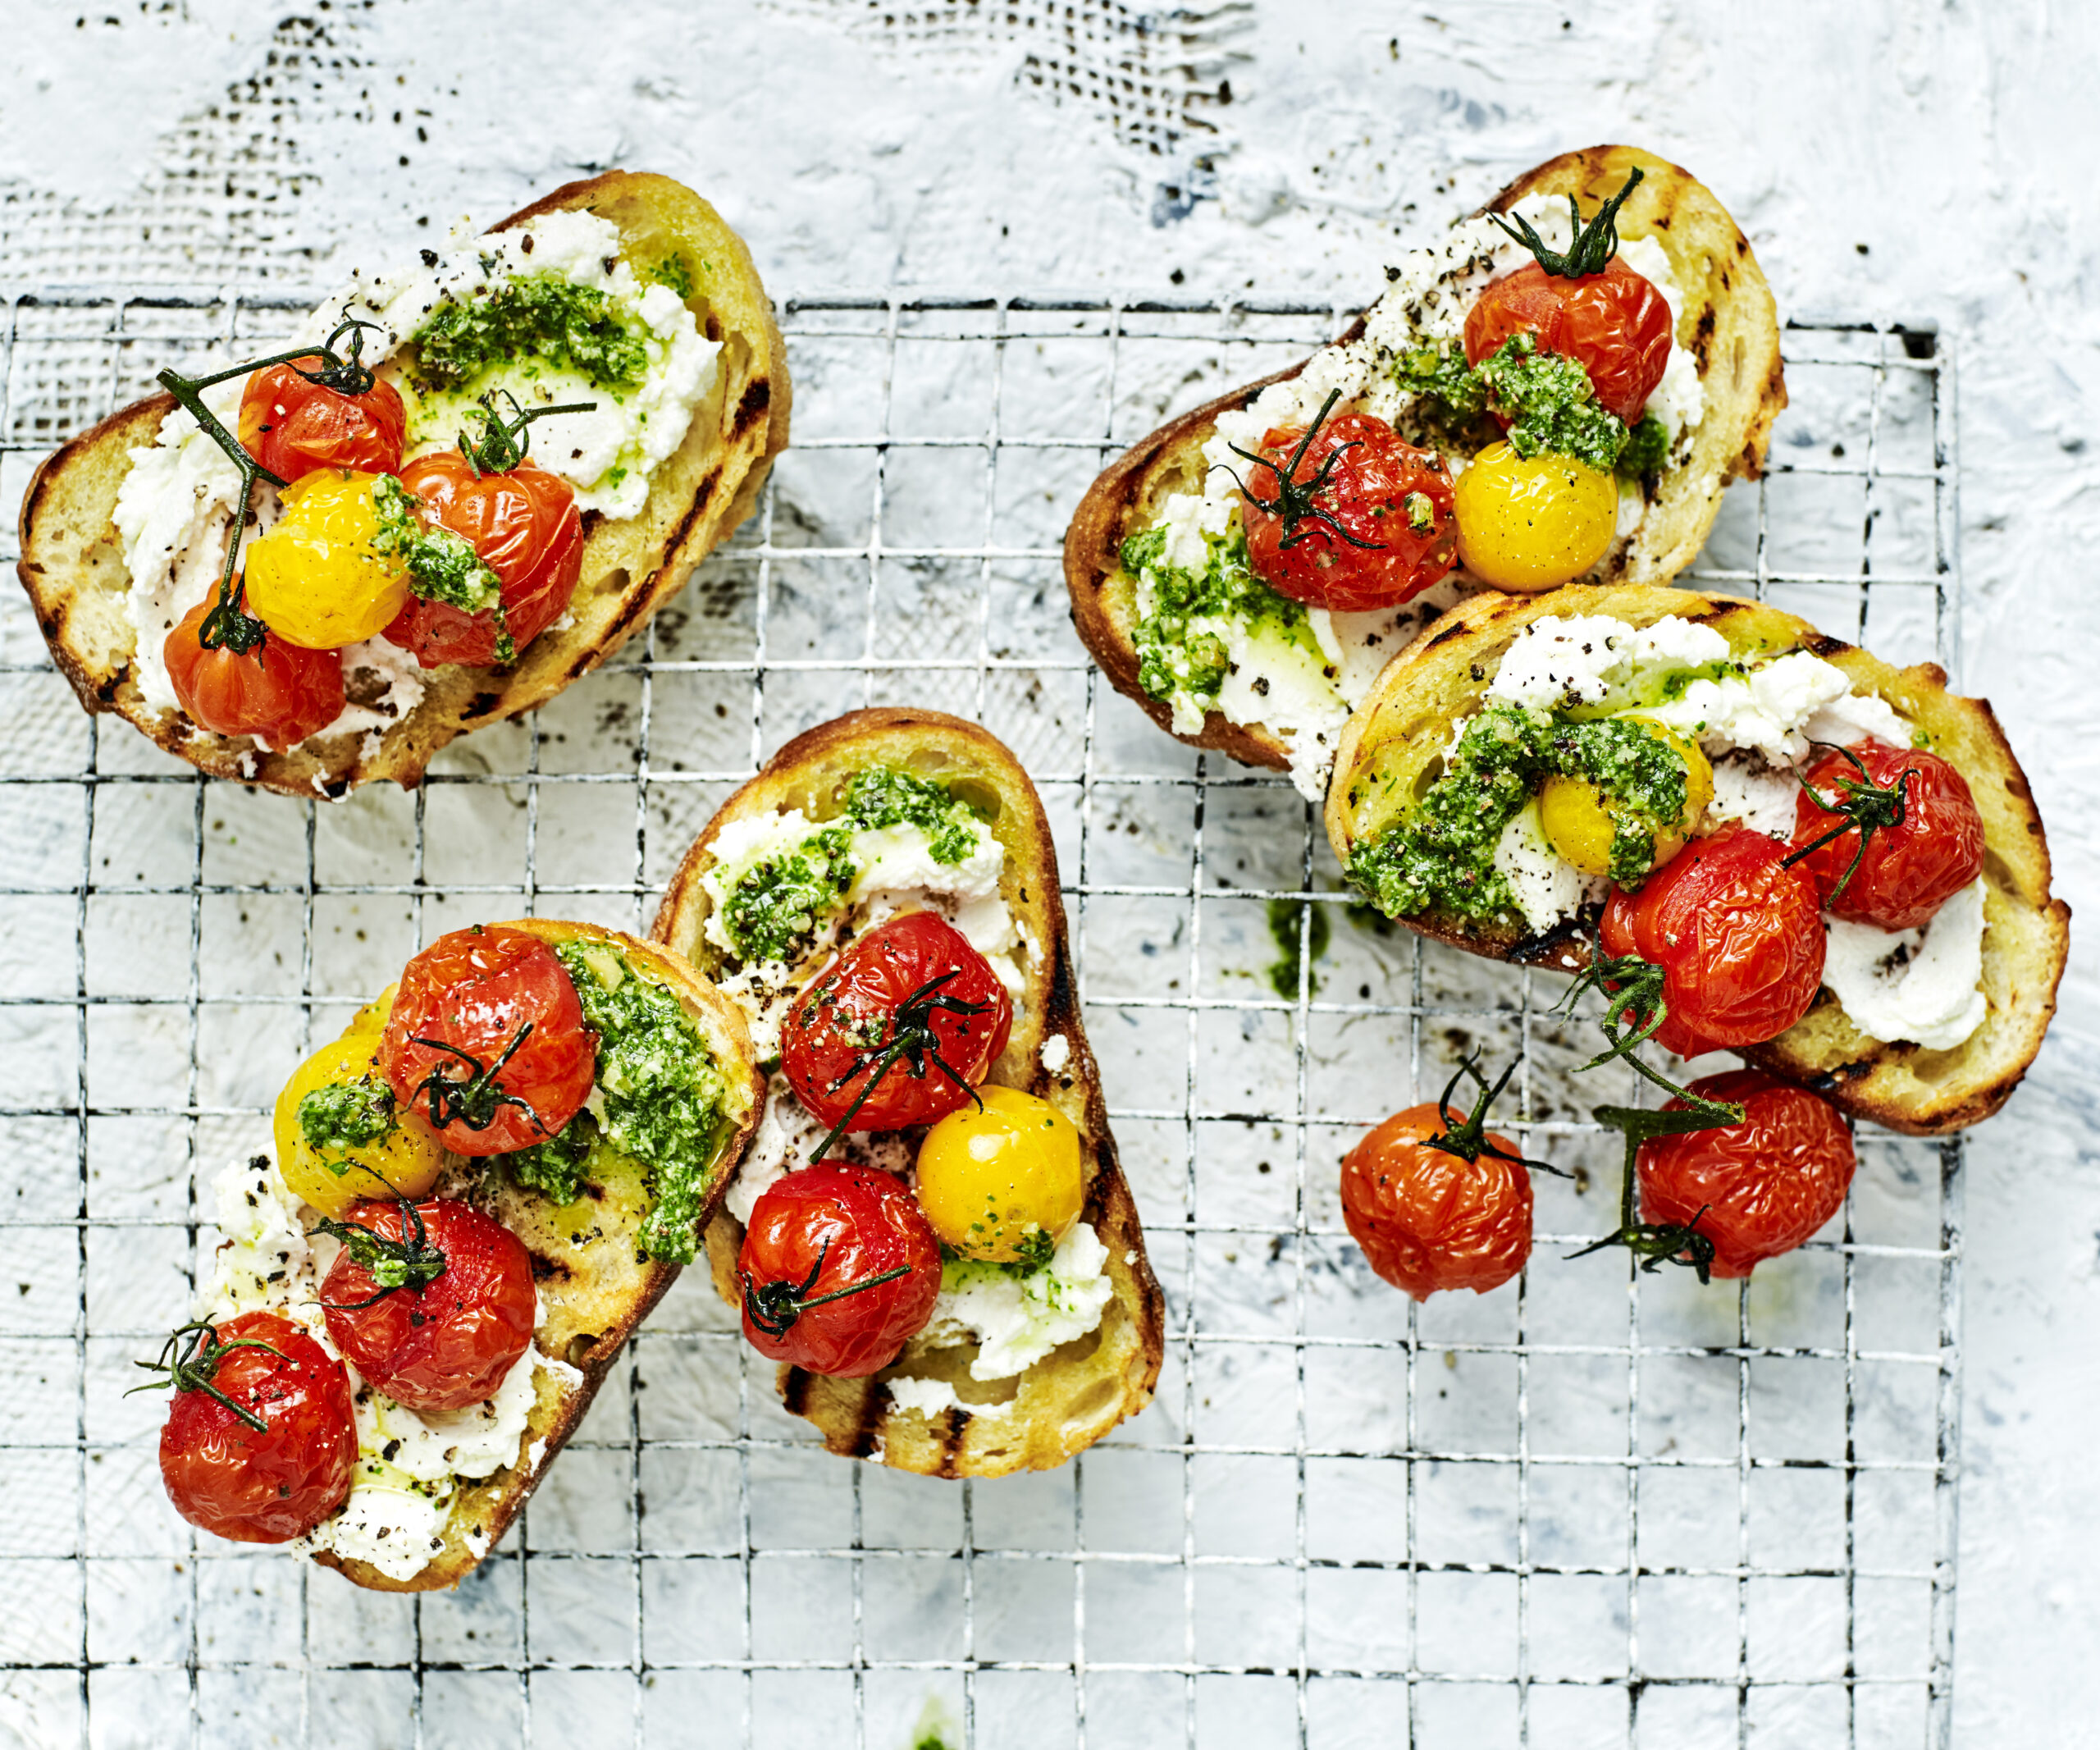 33 bruschetta recipes for brunch, lunch or your next party